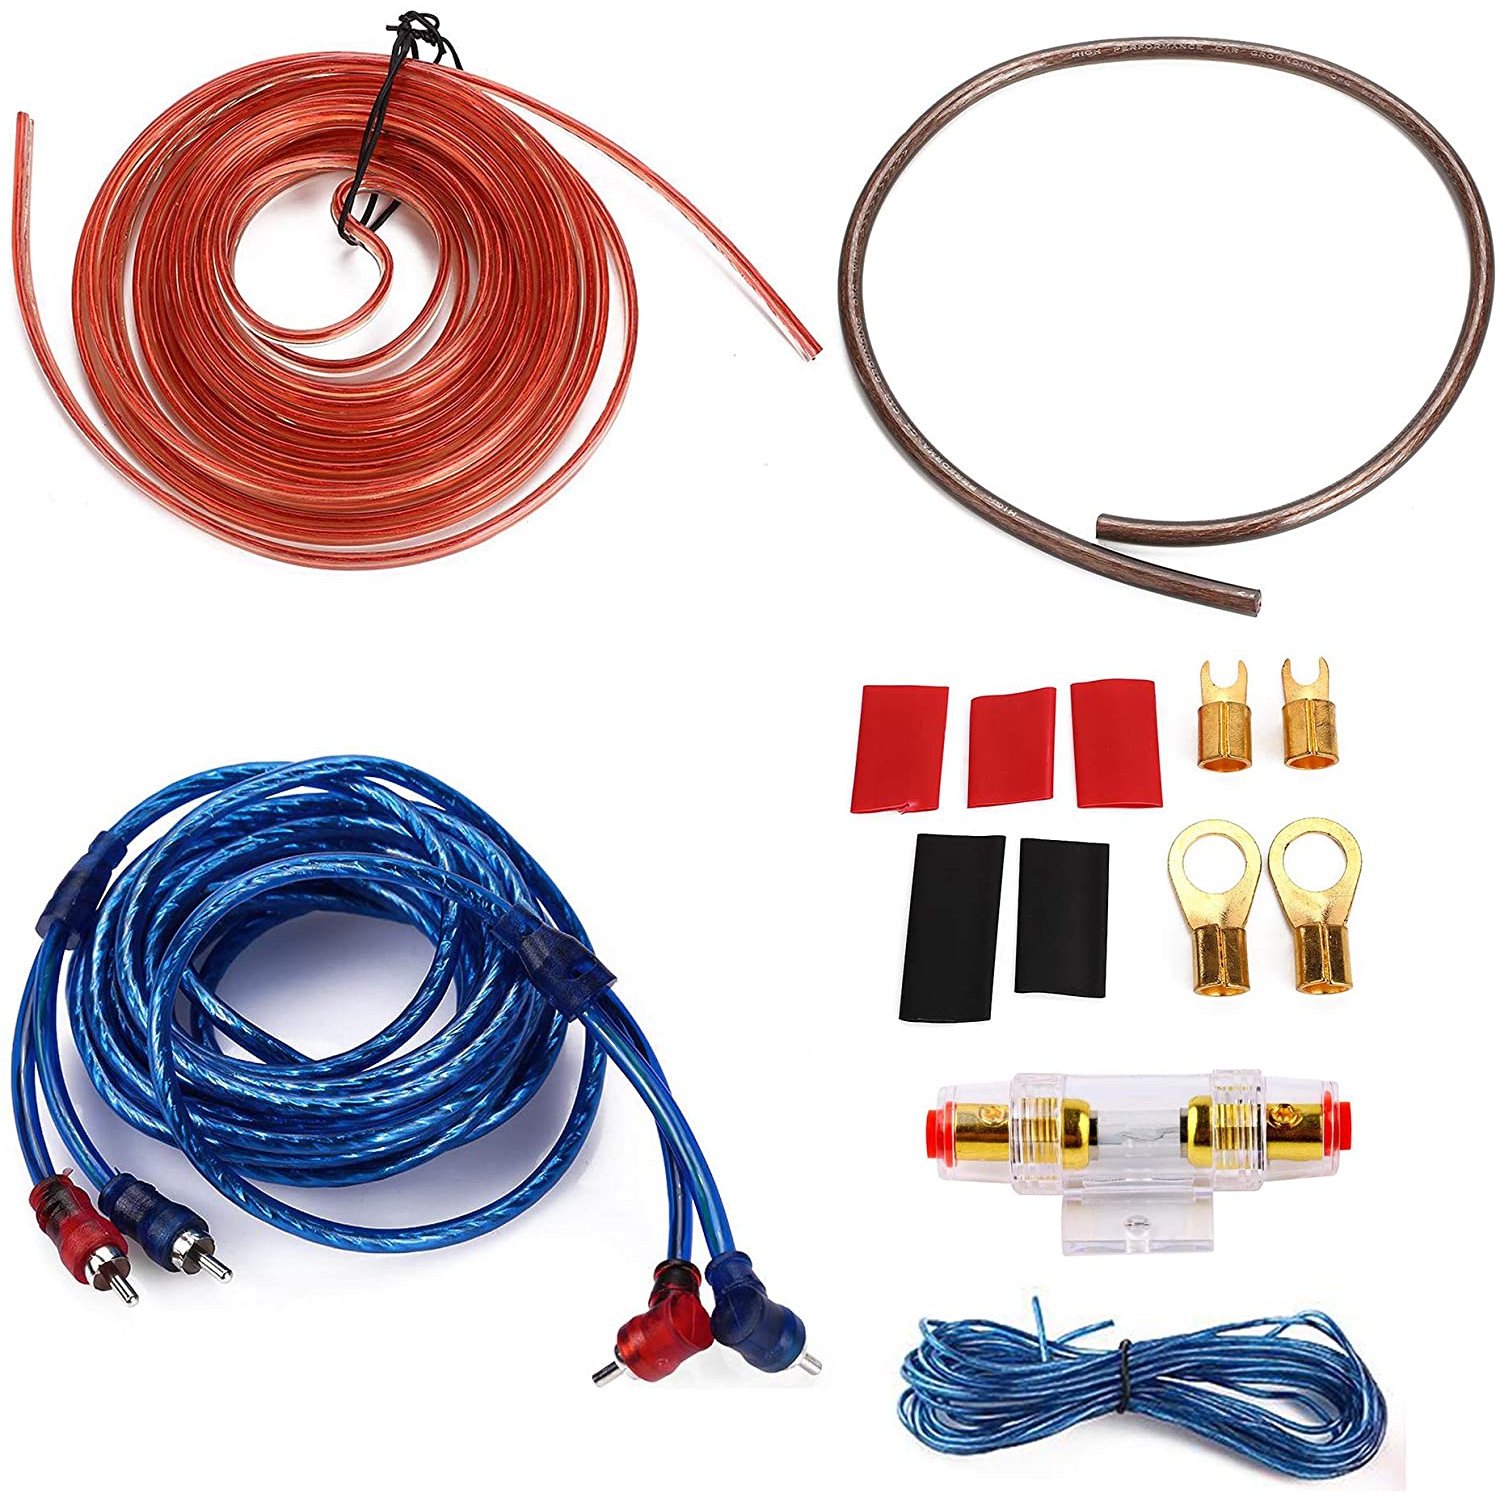 8 Gauge Amp 1500W Auto Car Audio System Speaker Kit Complete Amplifier Install Wiring Cable